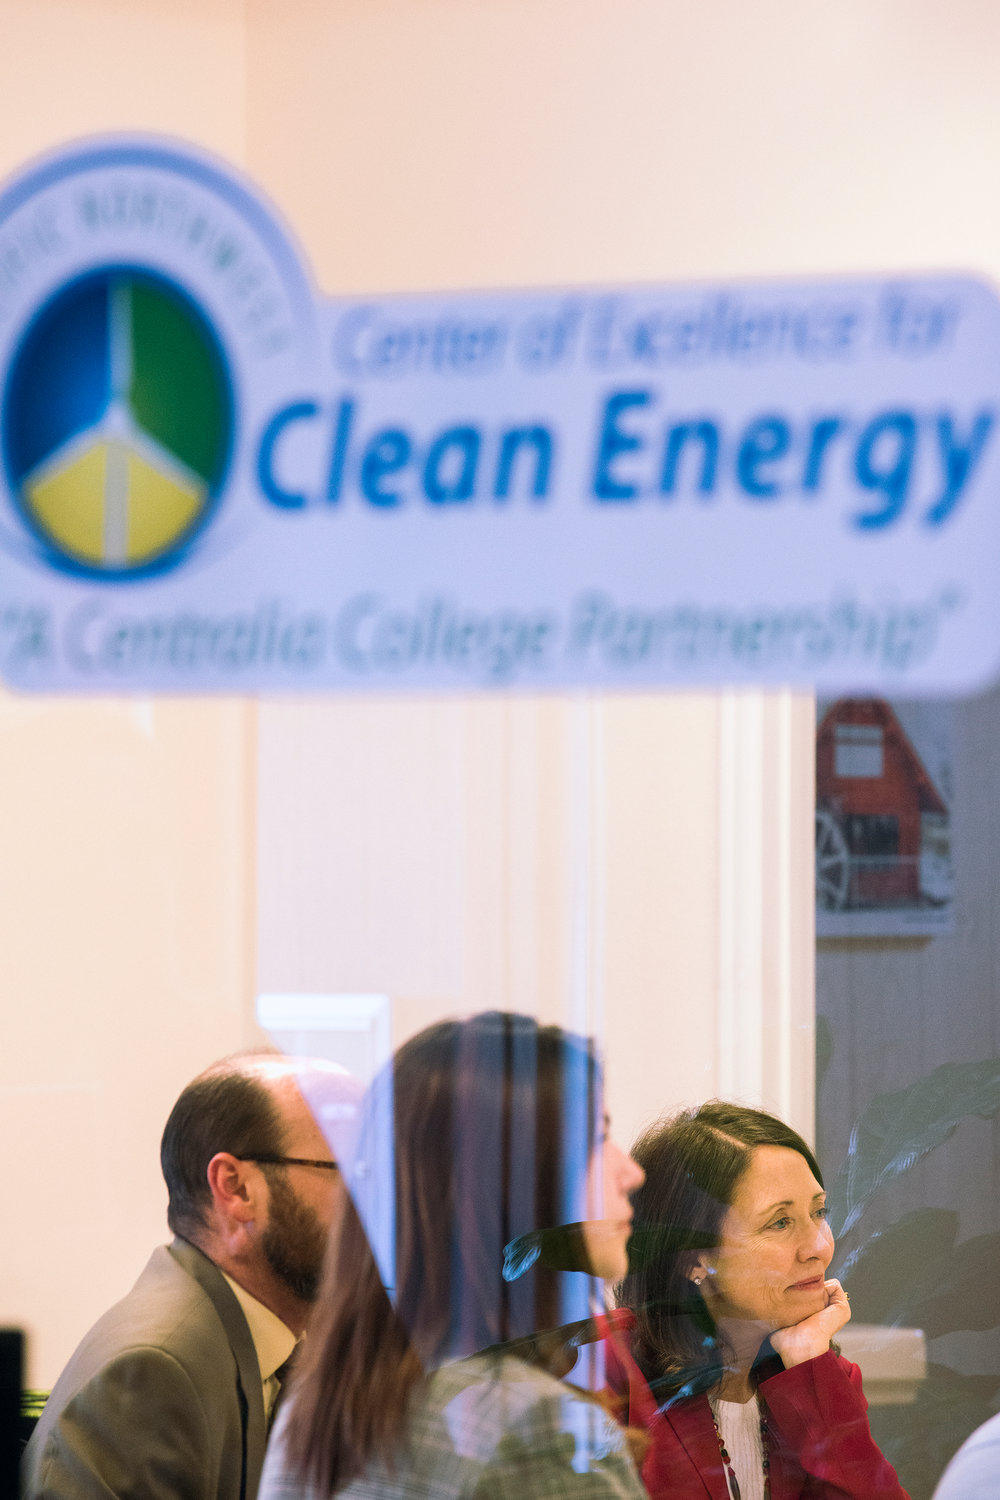 U.S. Sen. Maria Cantwell, D-Washington, right, listens during a presentation on various clean energy job training grants at Centralia College’s Center of Excellence for Clean Energy on Wednesday afternoon.